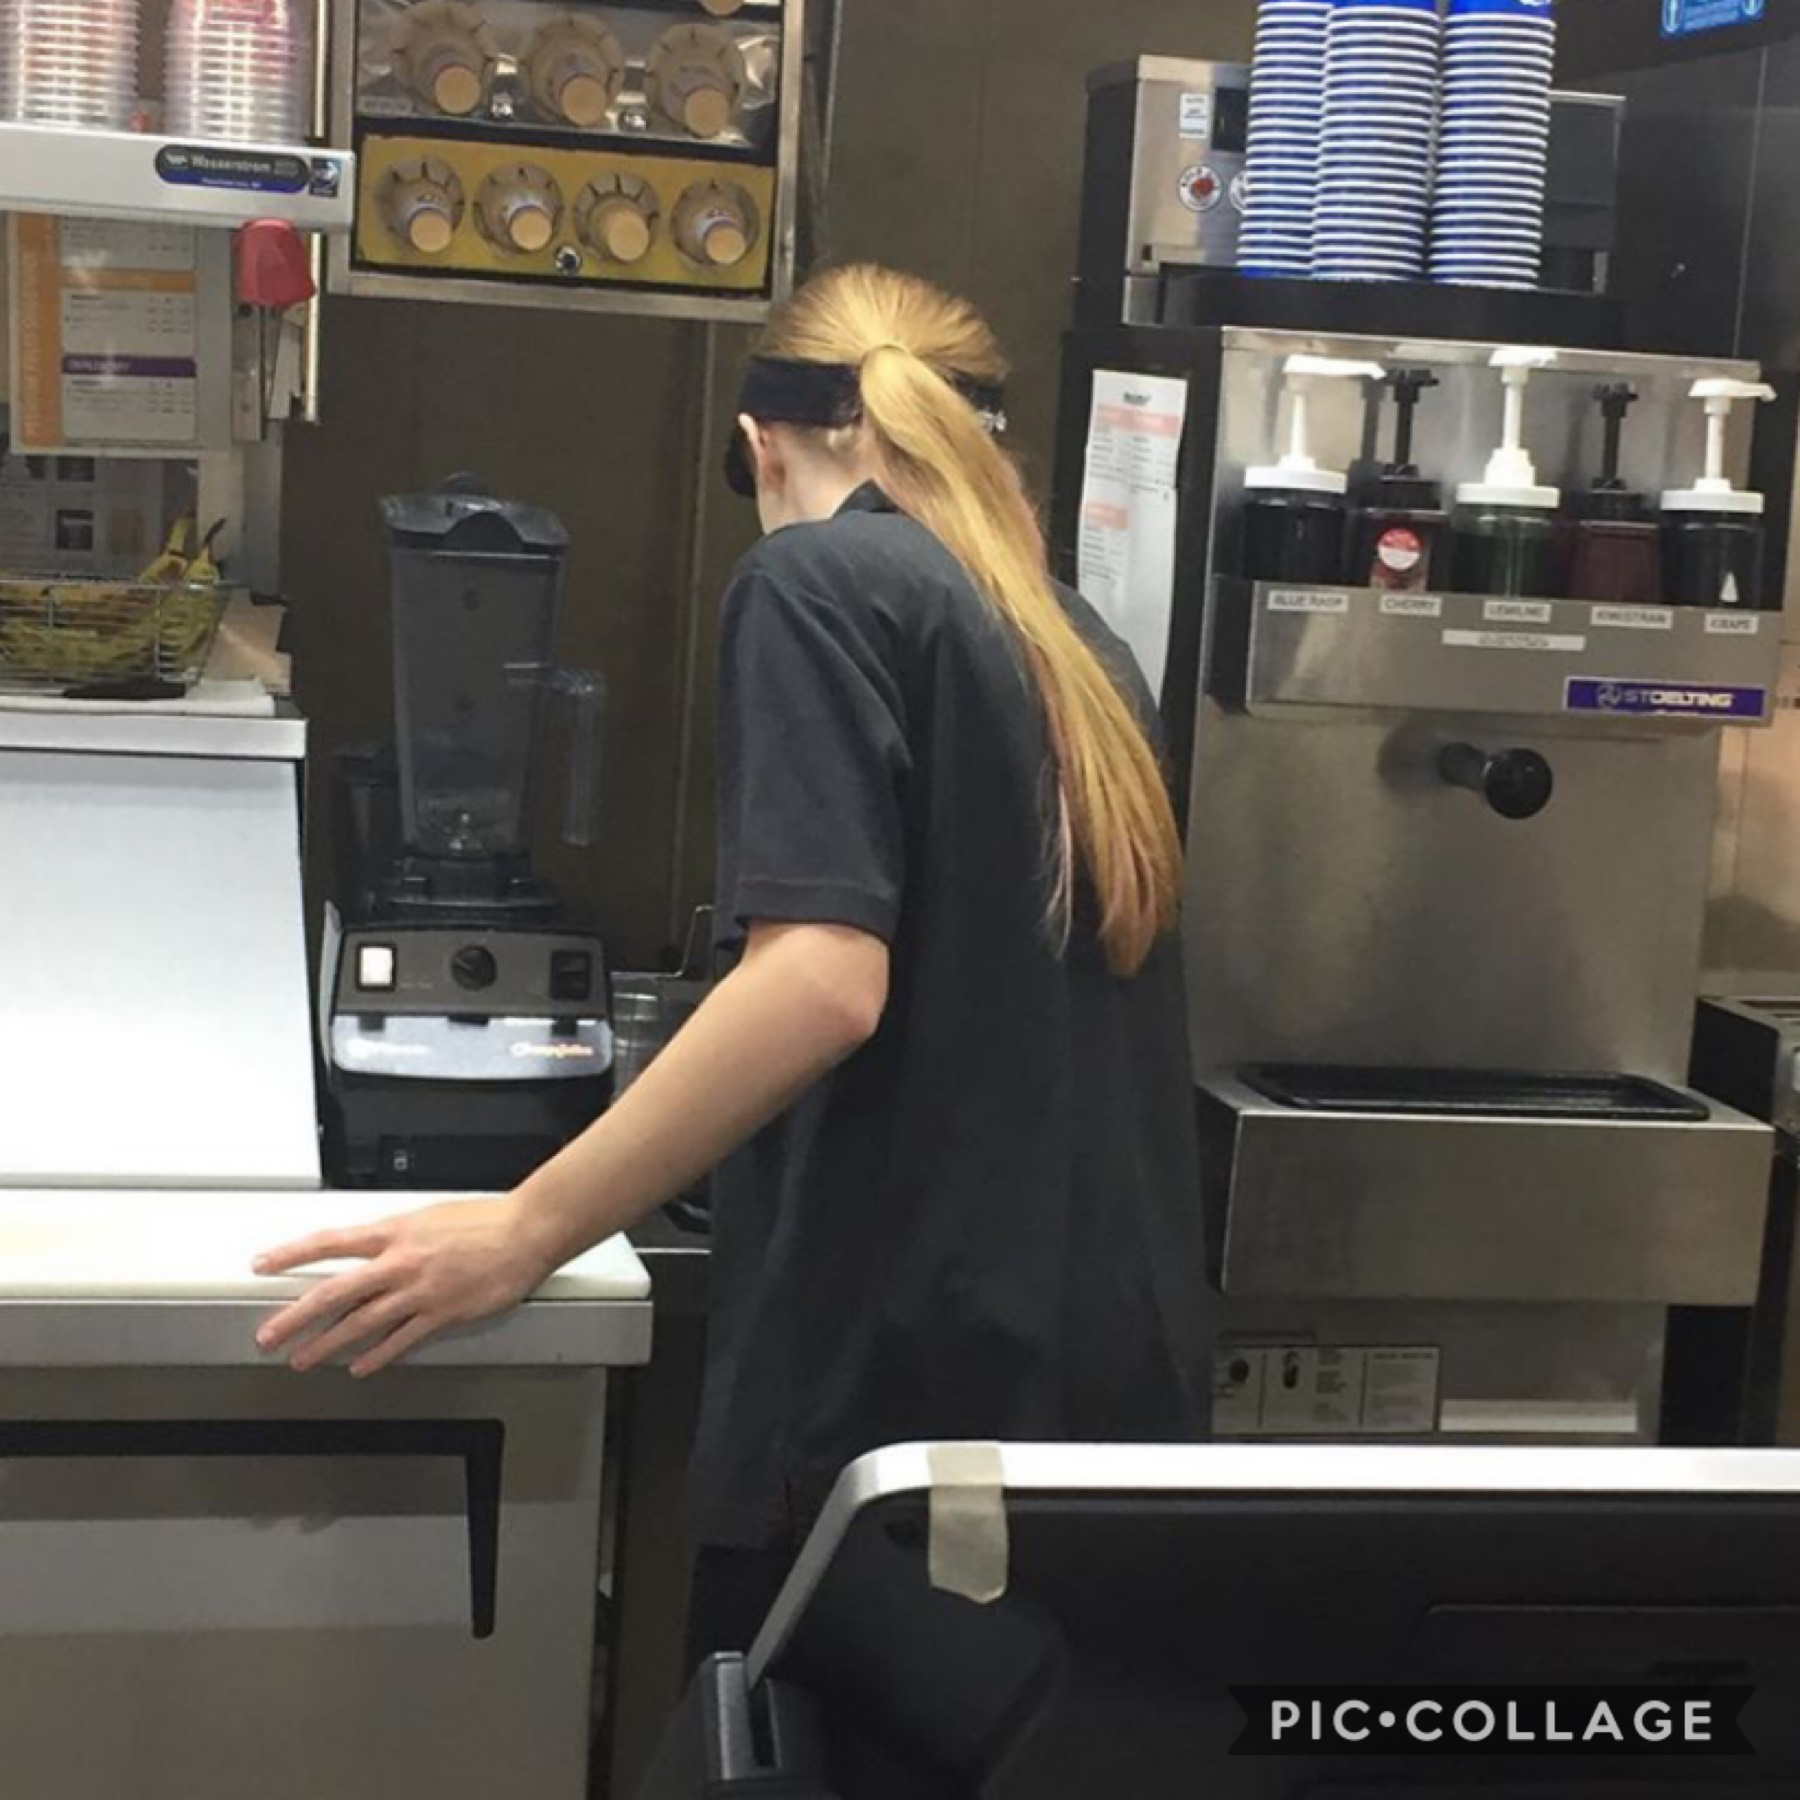 Behold, the only existing photo of me at work, courtesy of mckayla lol. I look terribly and I hate it but I’m just using it to say that I don’t hATE my job, but I definitely don’t love it like at all. It’s just. Tolerable. Yeah. So! Yeah! But i have a ste